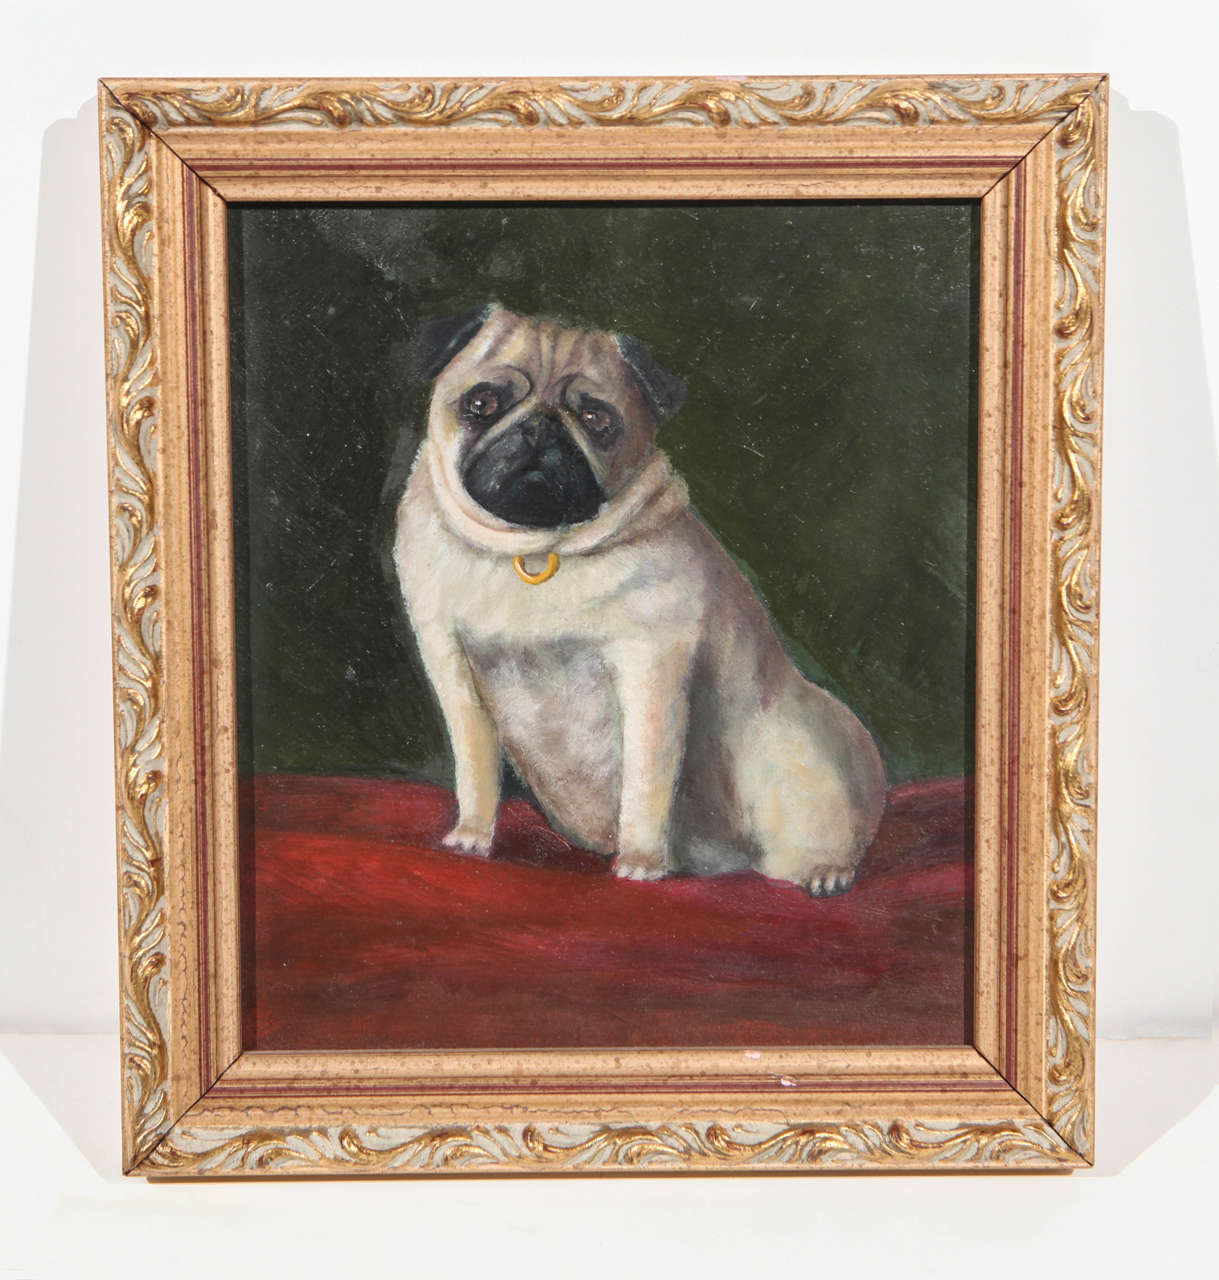 Petite, original, Italian oil on board painting of a pug on a red cushion.